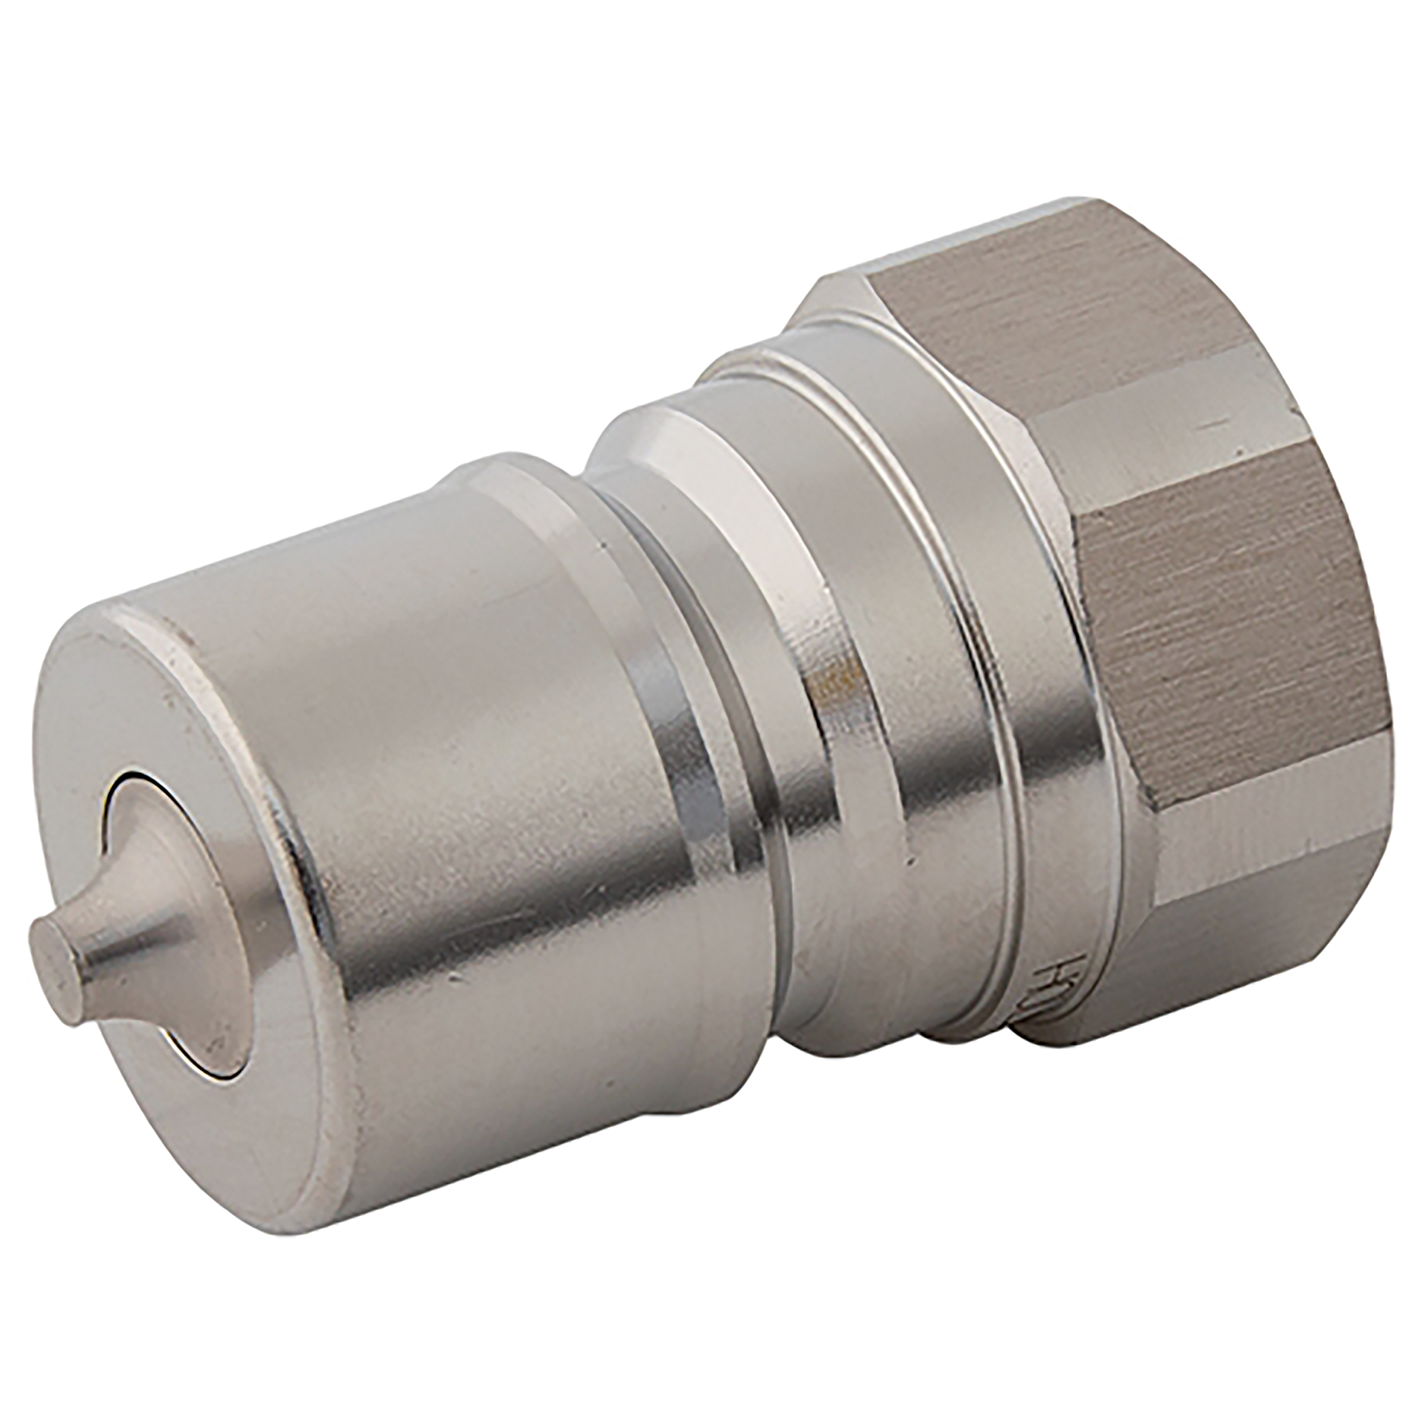 3/4"BSPP Female Thread ISO-B 3 16 Stainless Steel Interchang